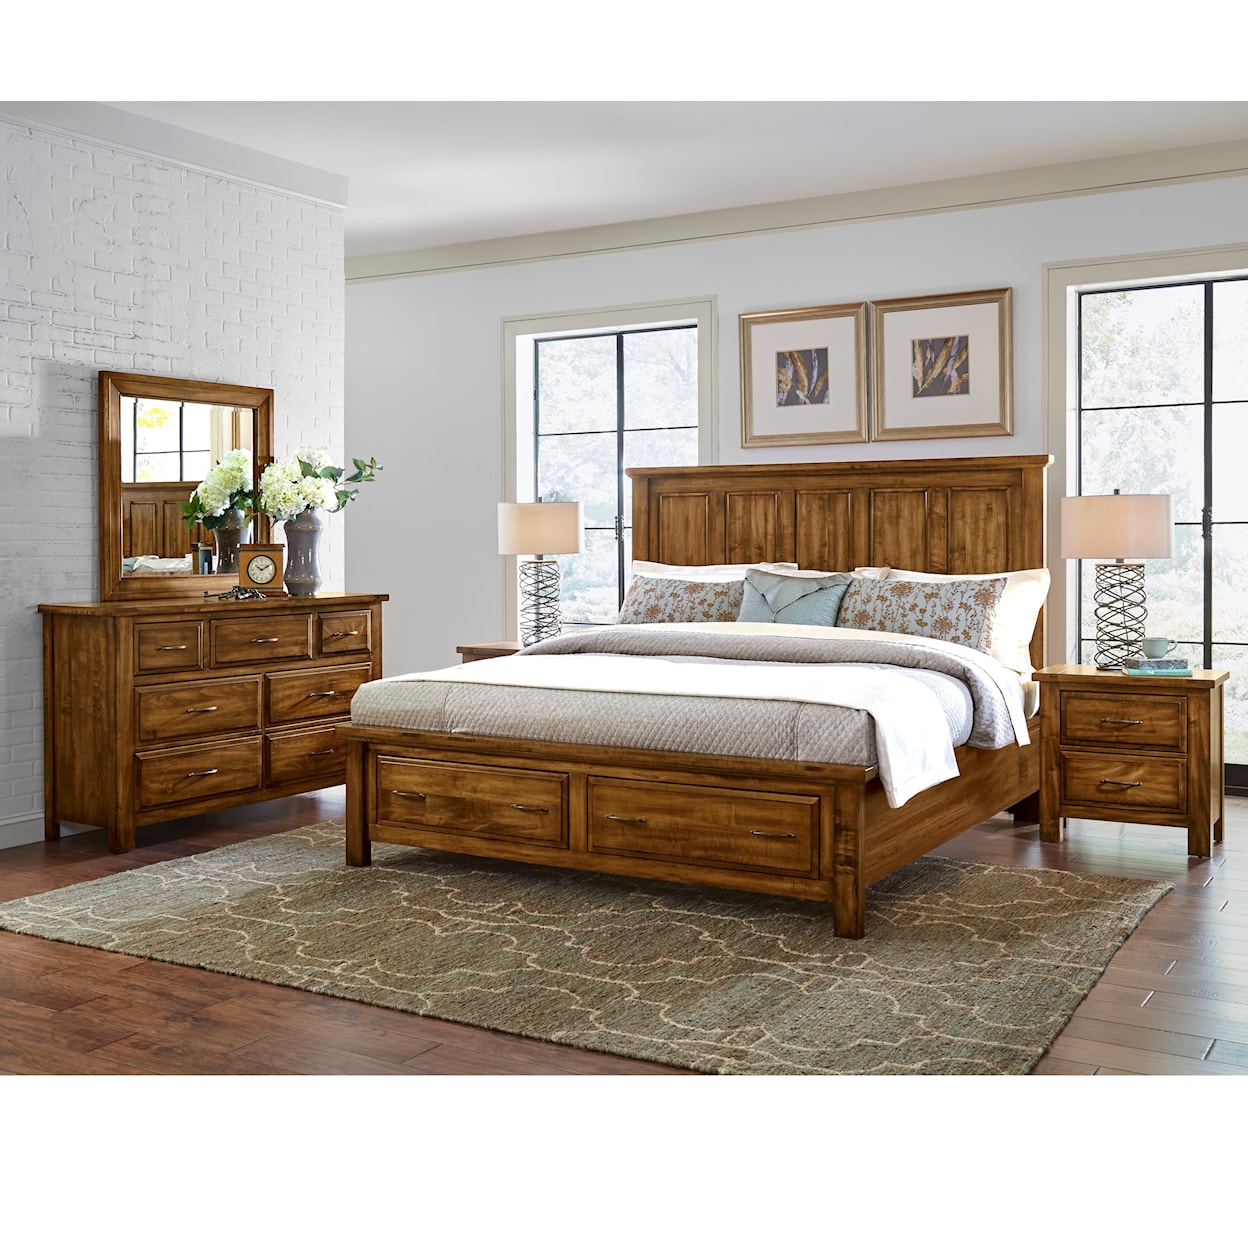 Virginia House Mt Airy King Mansion Storage Bed